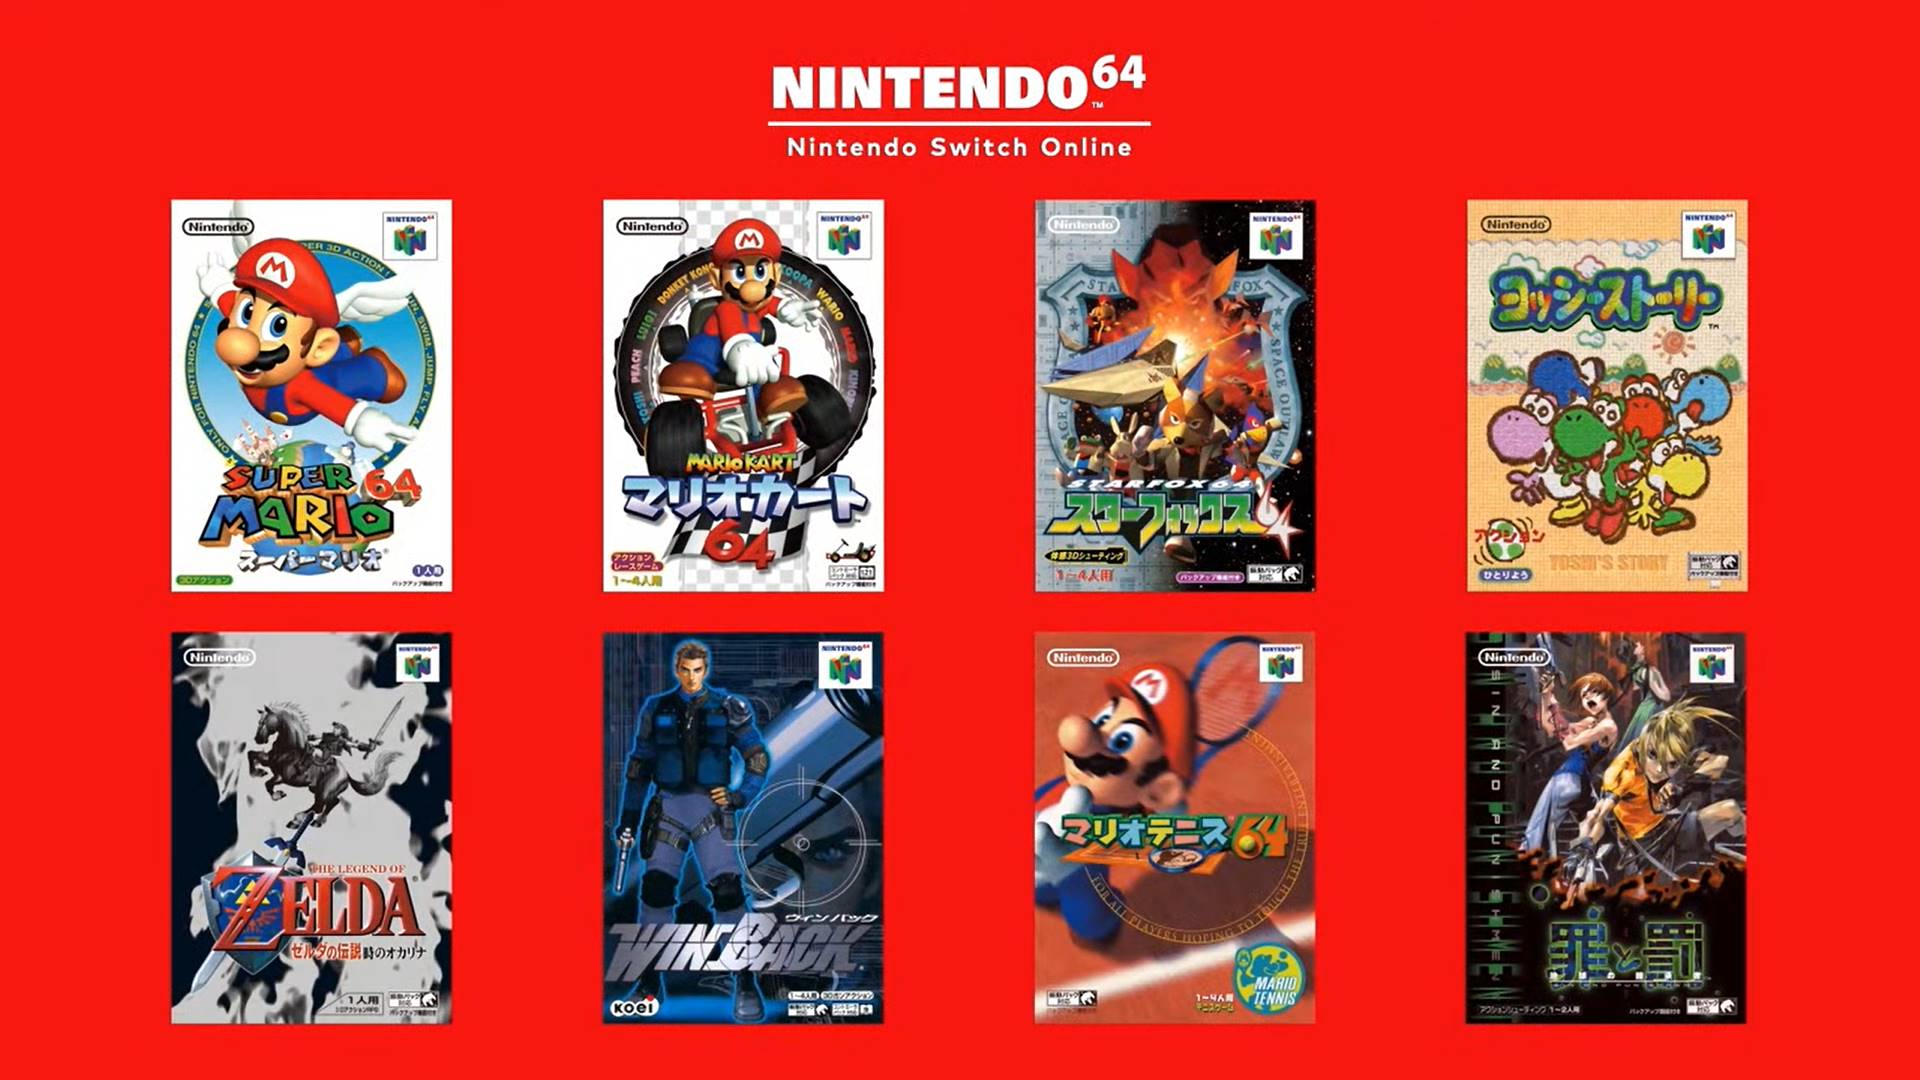 N64 and Sega Genesis games come to Switch Online, but will likely